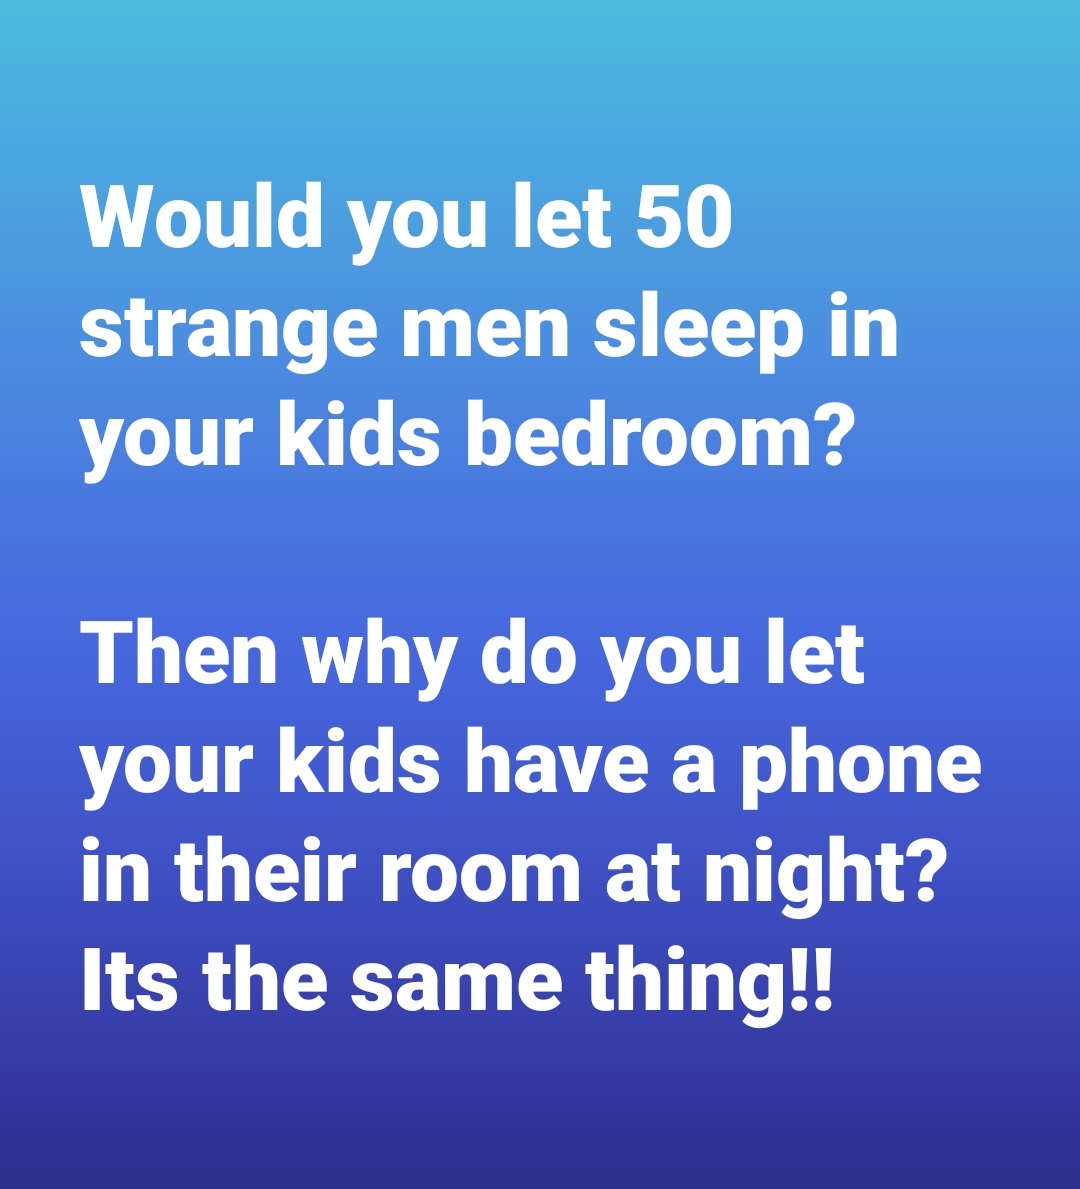 quotes about life and love - Would you let 50 strange men sleep in your kids bedroom? Then why do you let your kids have a phone in their room at night? Its the same thing!!